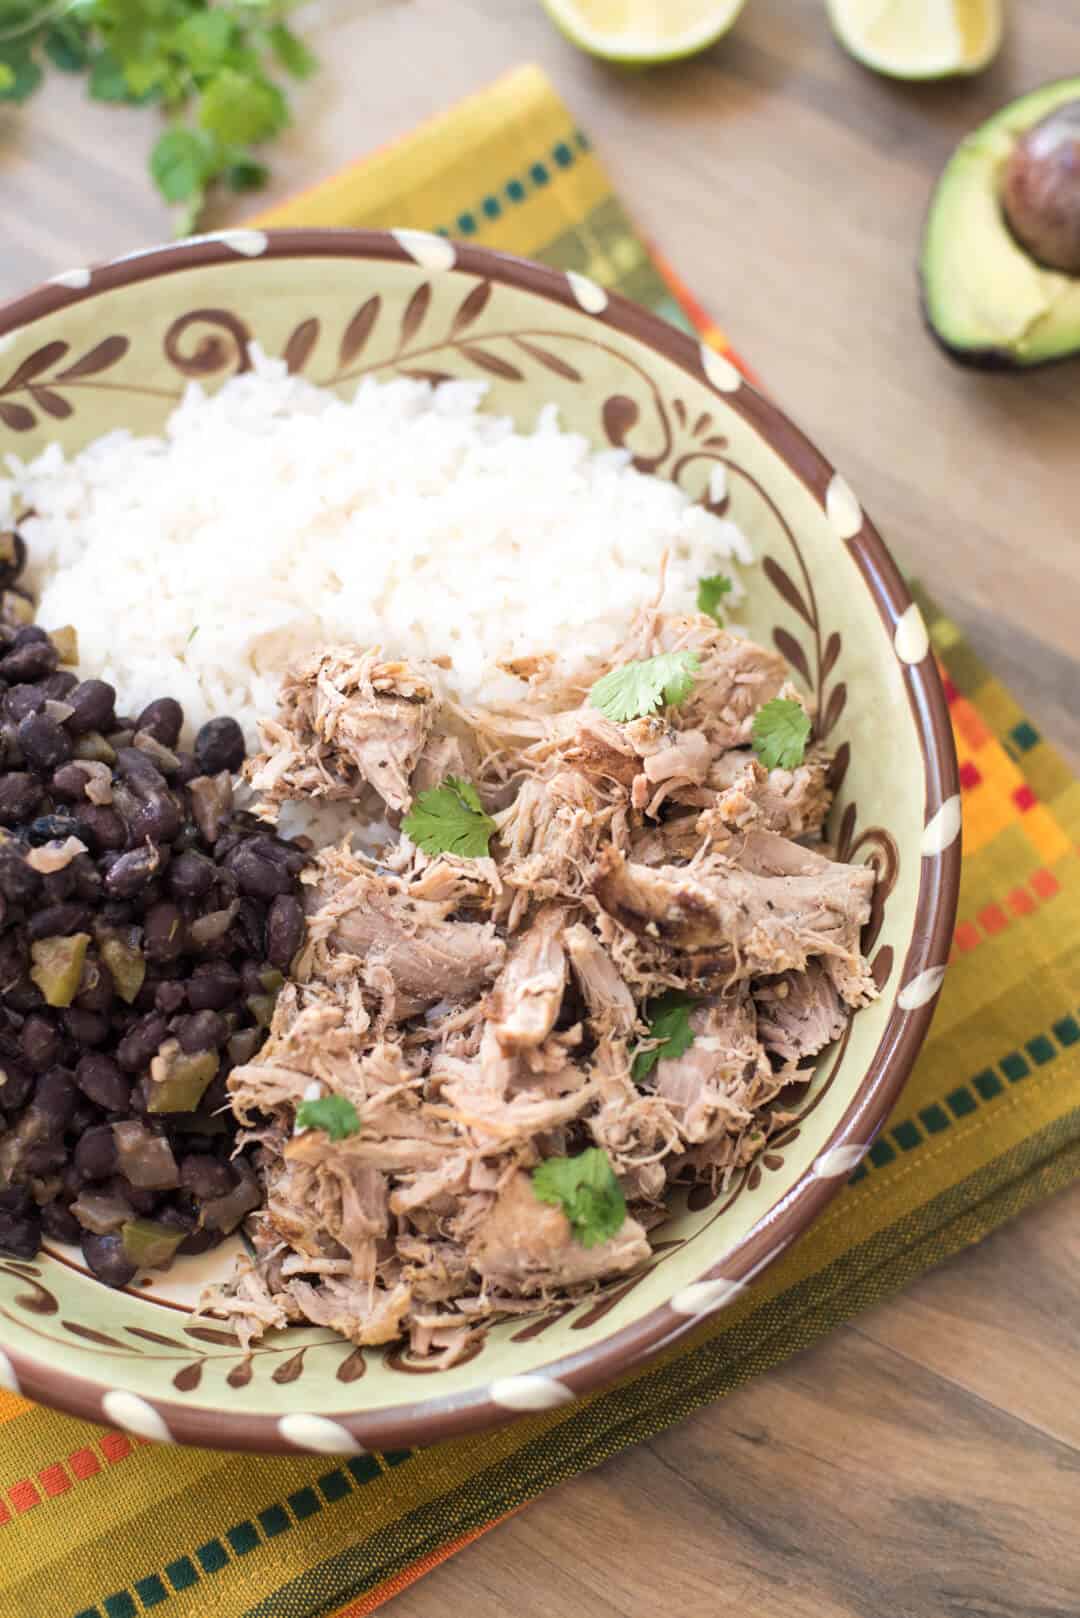 Slow Cooker Cuban Pork with Black Beans with white rice in a bowl on a patterned cloth.